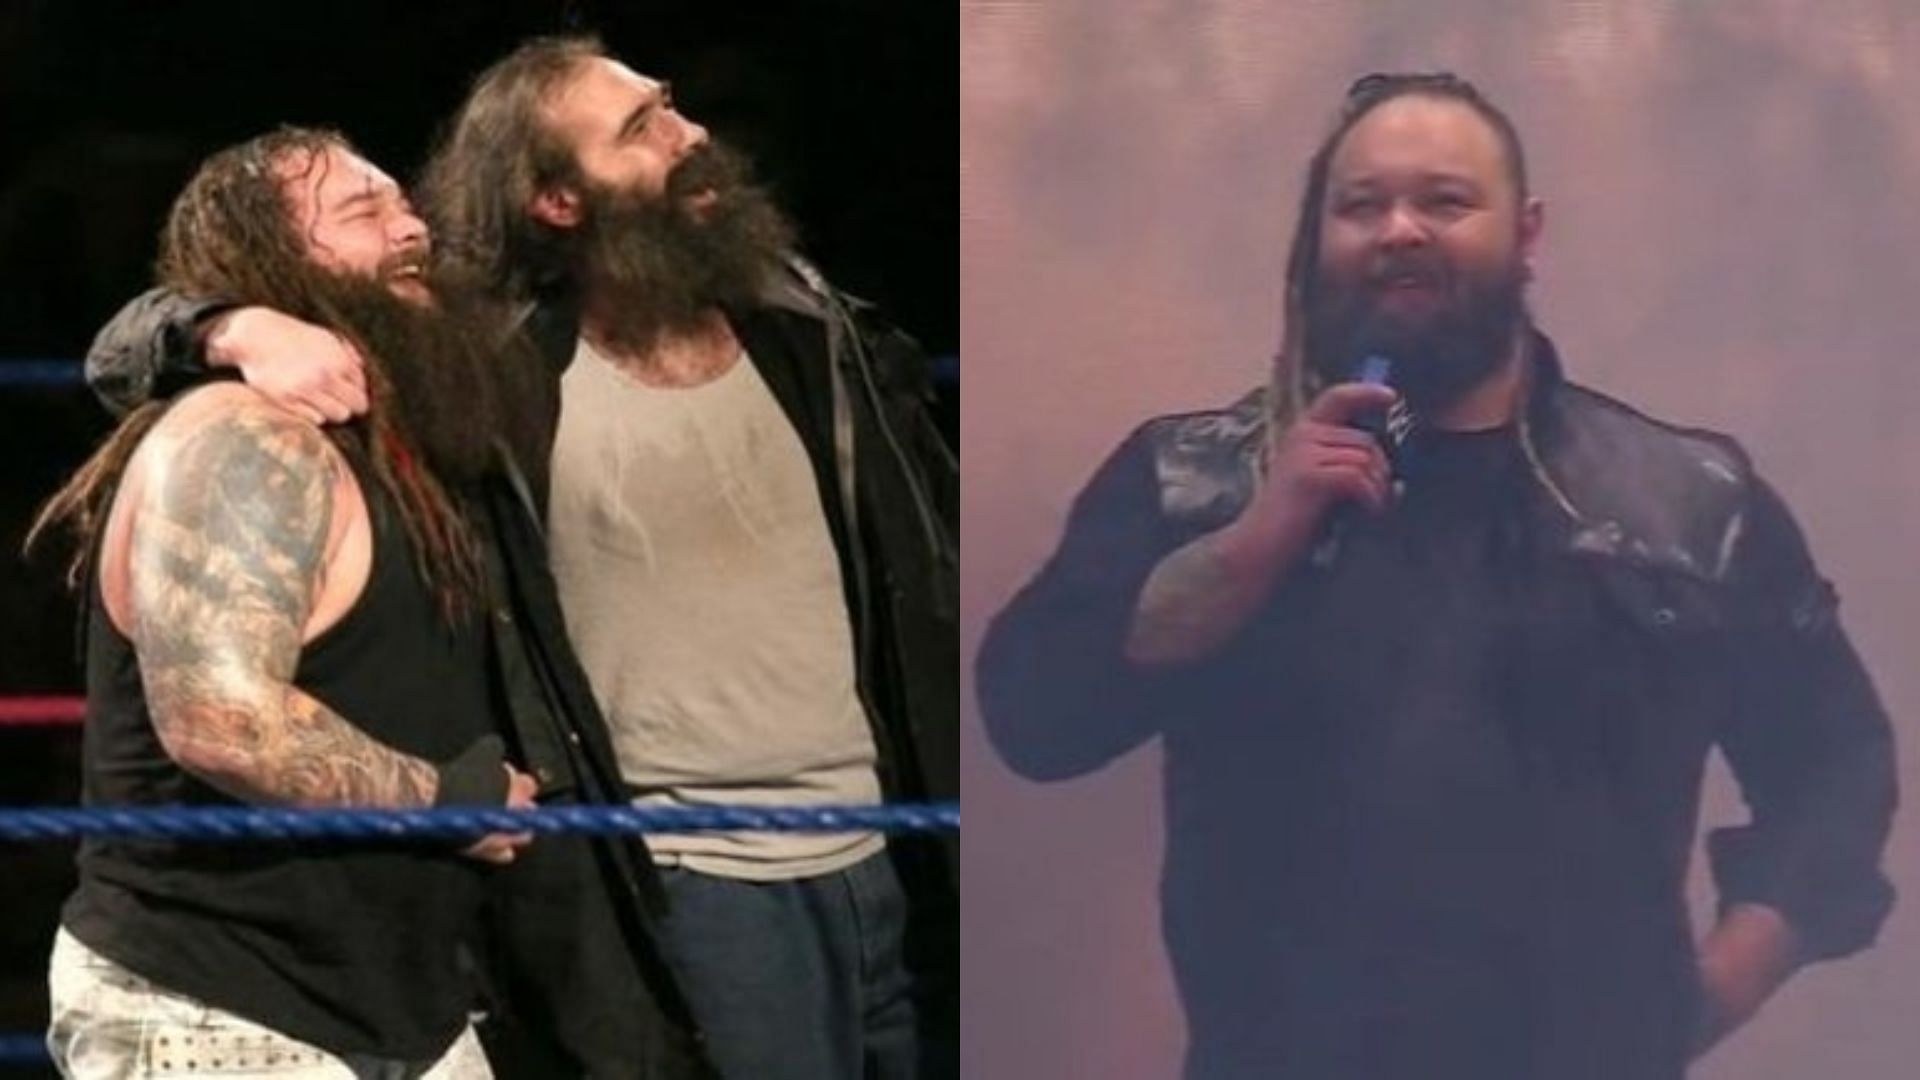 Bray Wyatt paid tribute to Brodie Lee on SmackDown